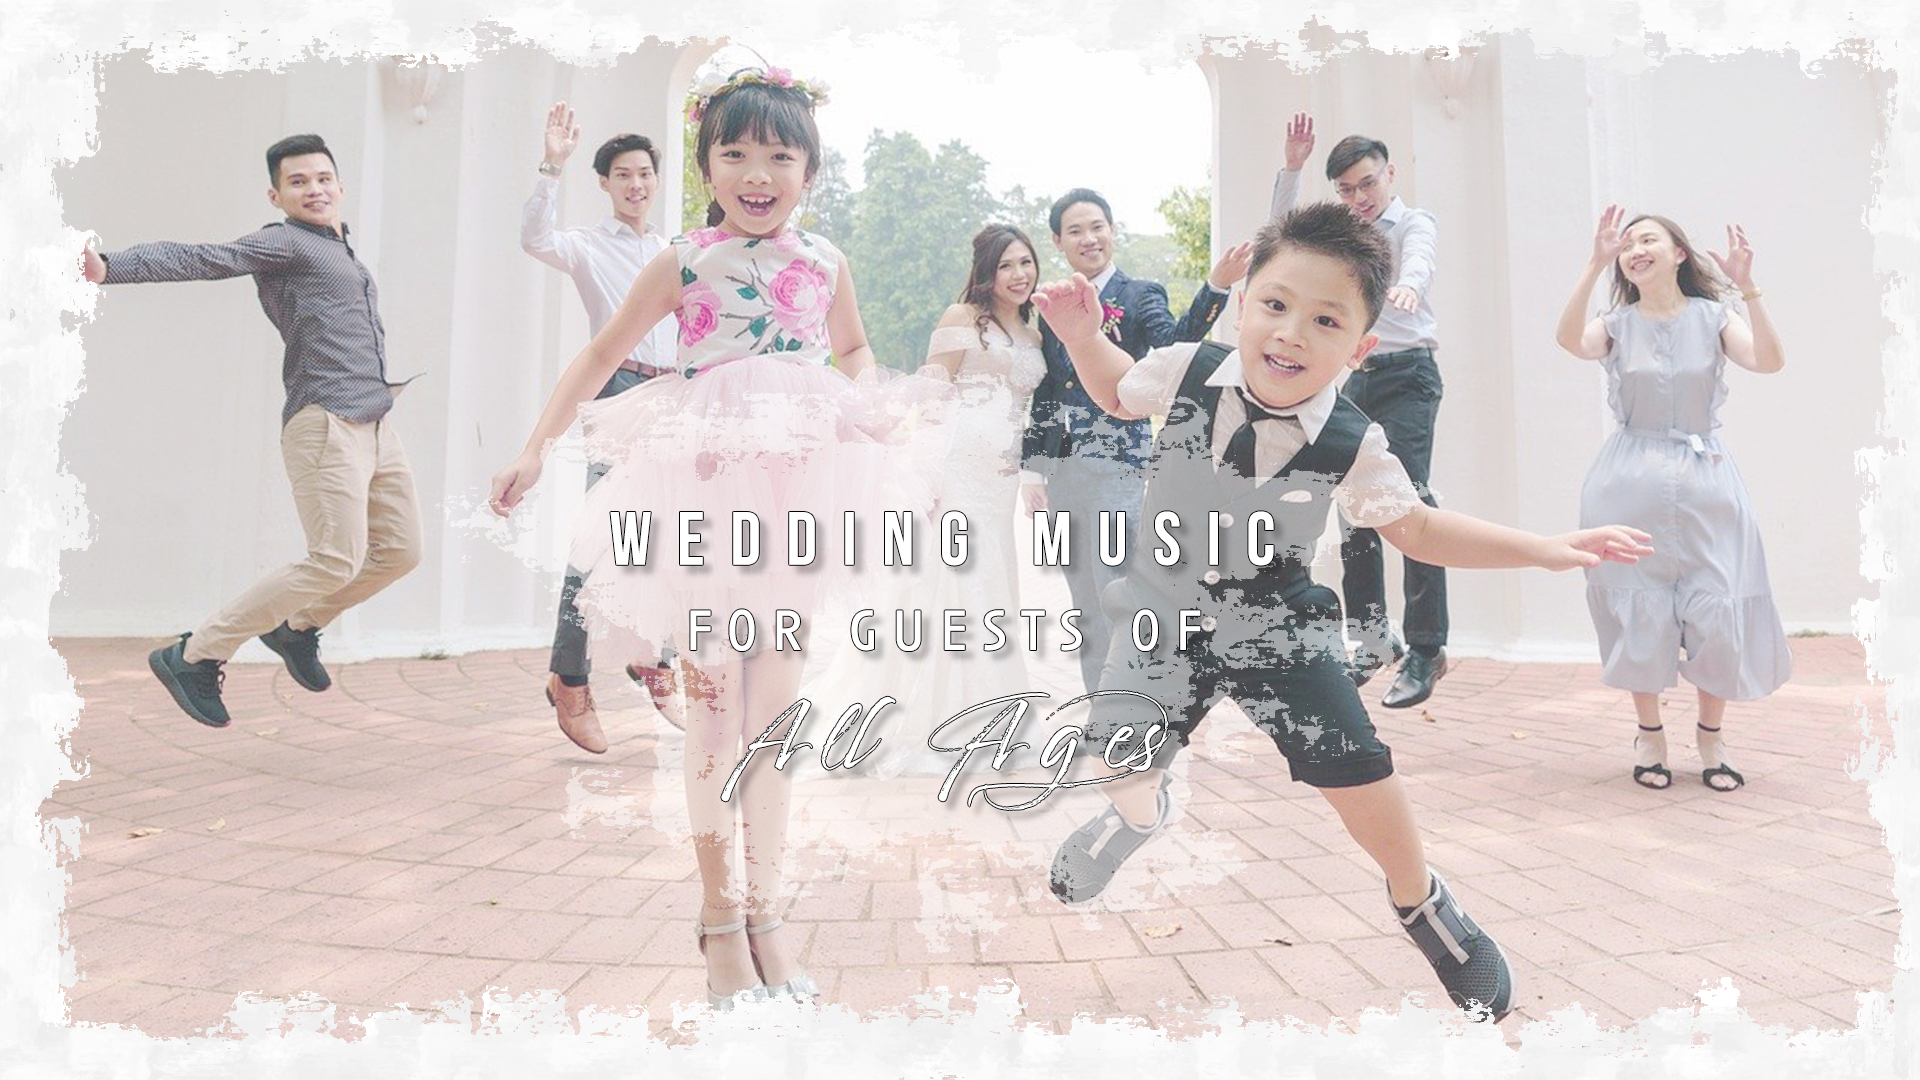 Wedding Music for Guests of All Ages